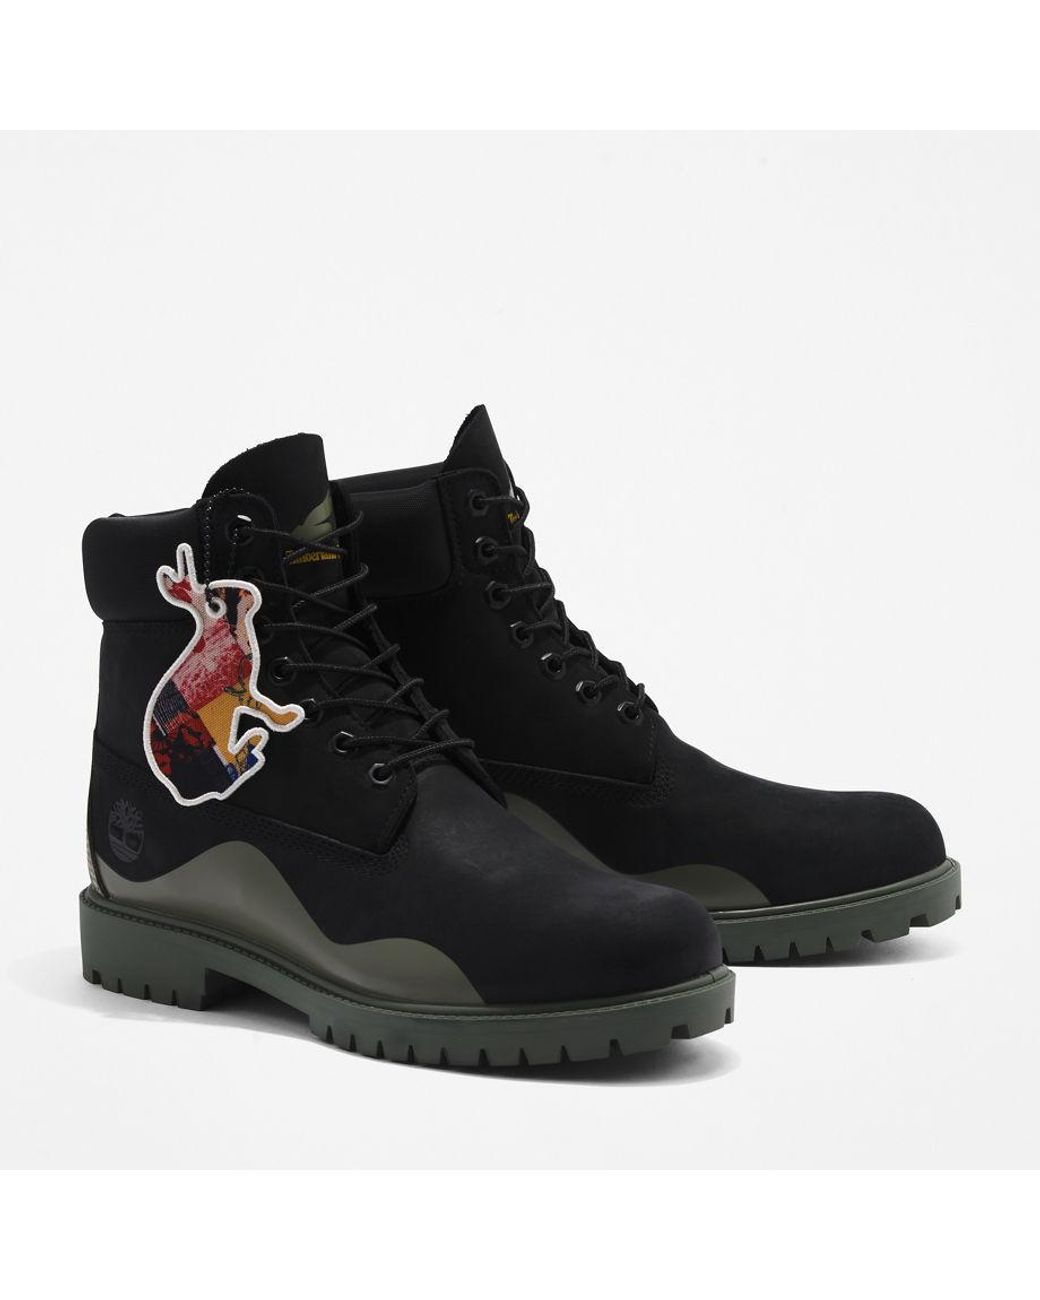 Premium Leather Timberland Boots